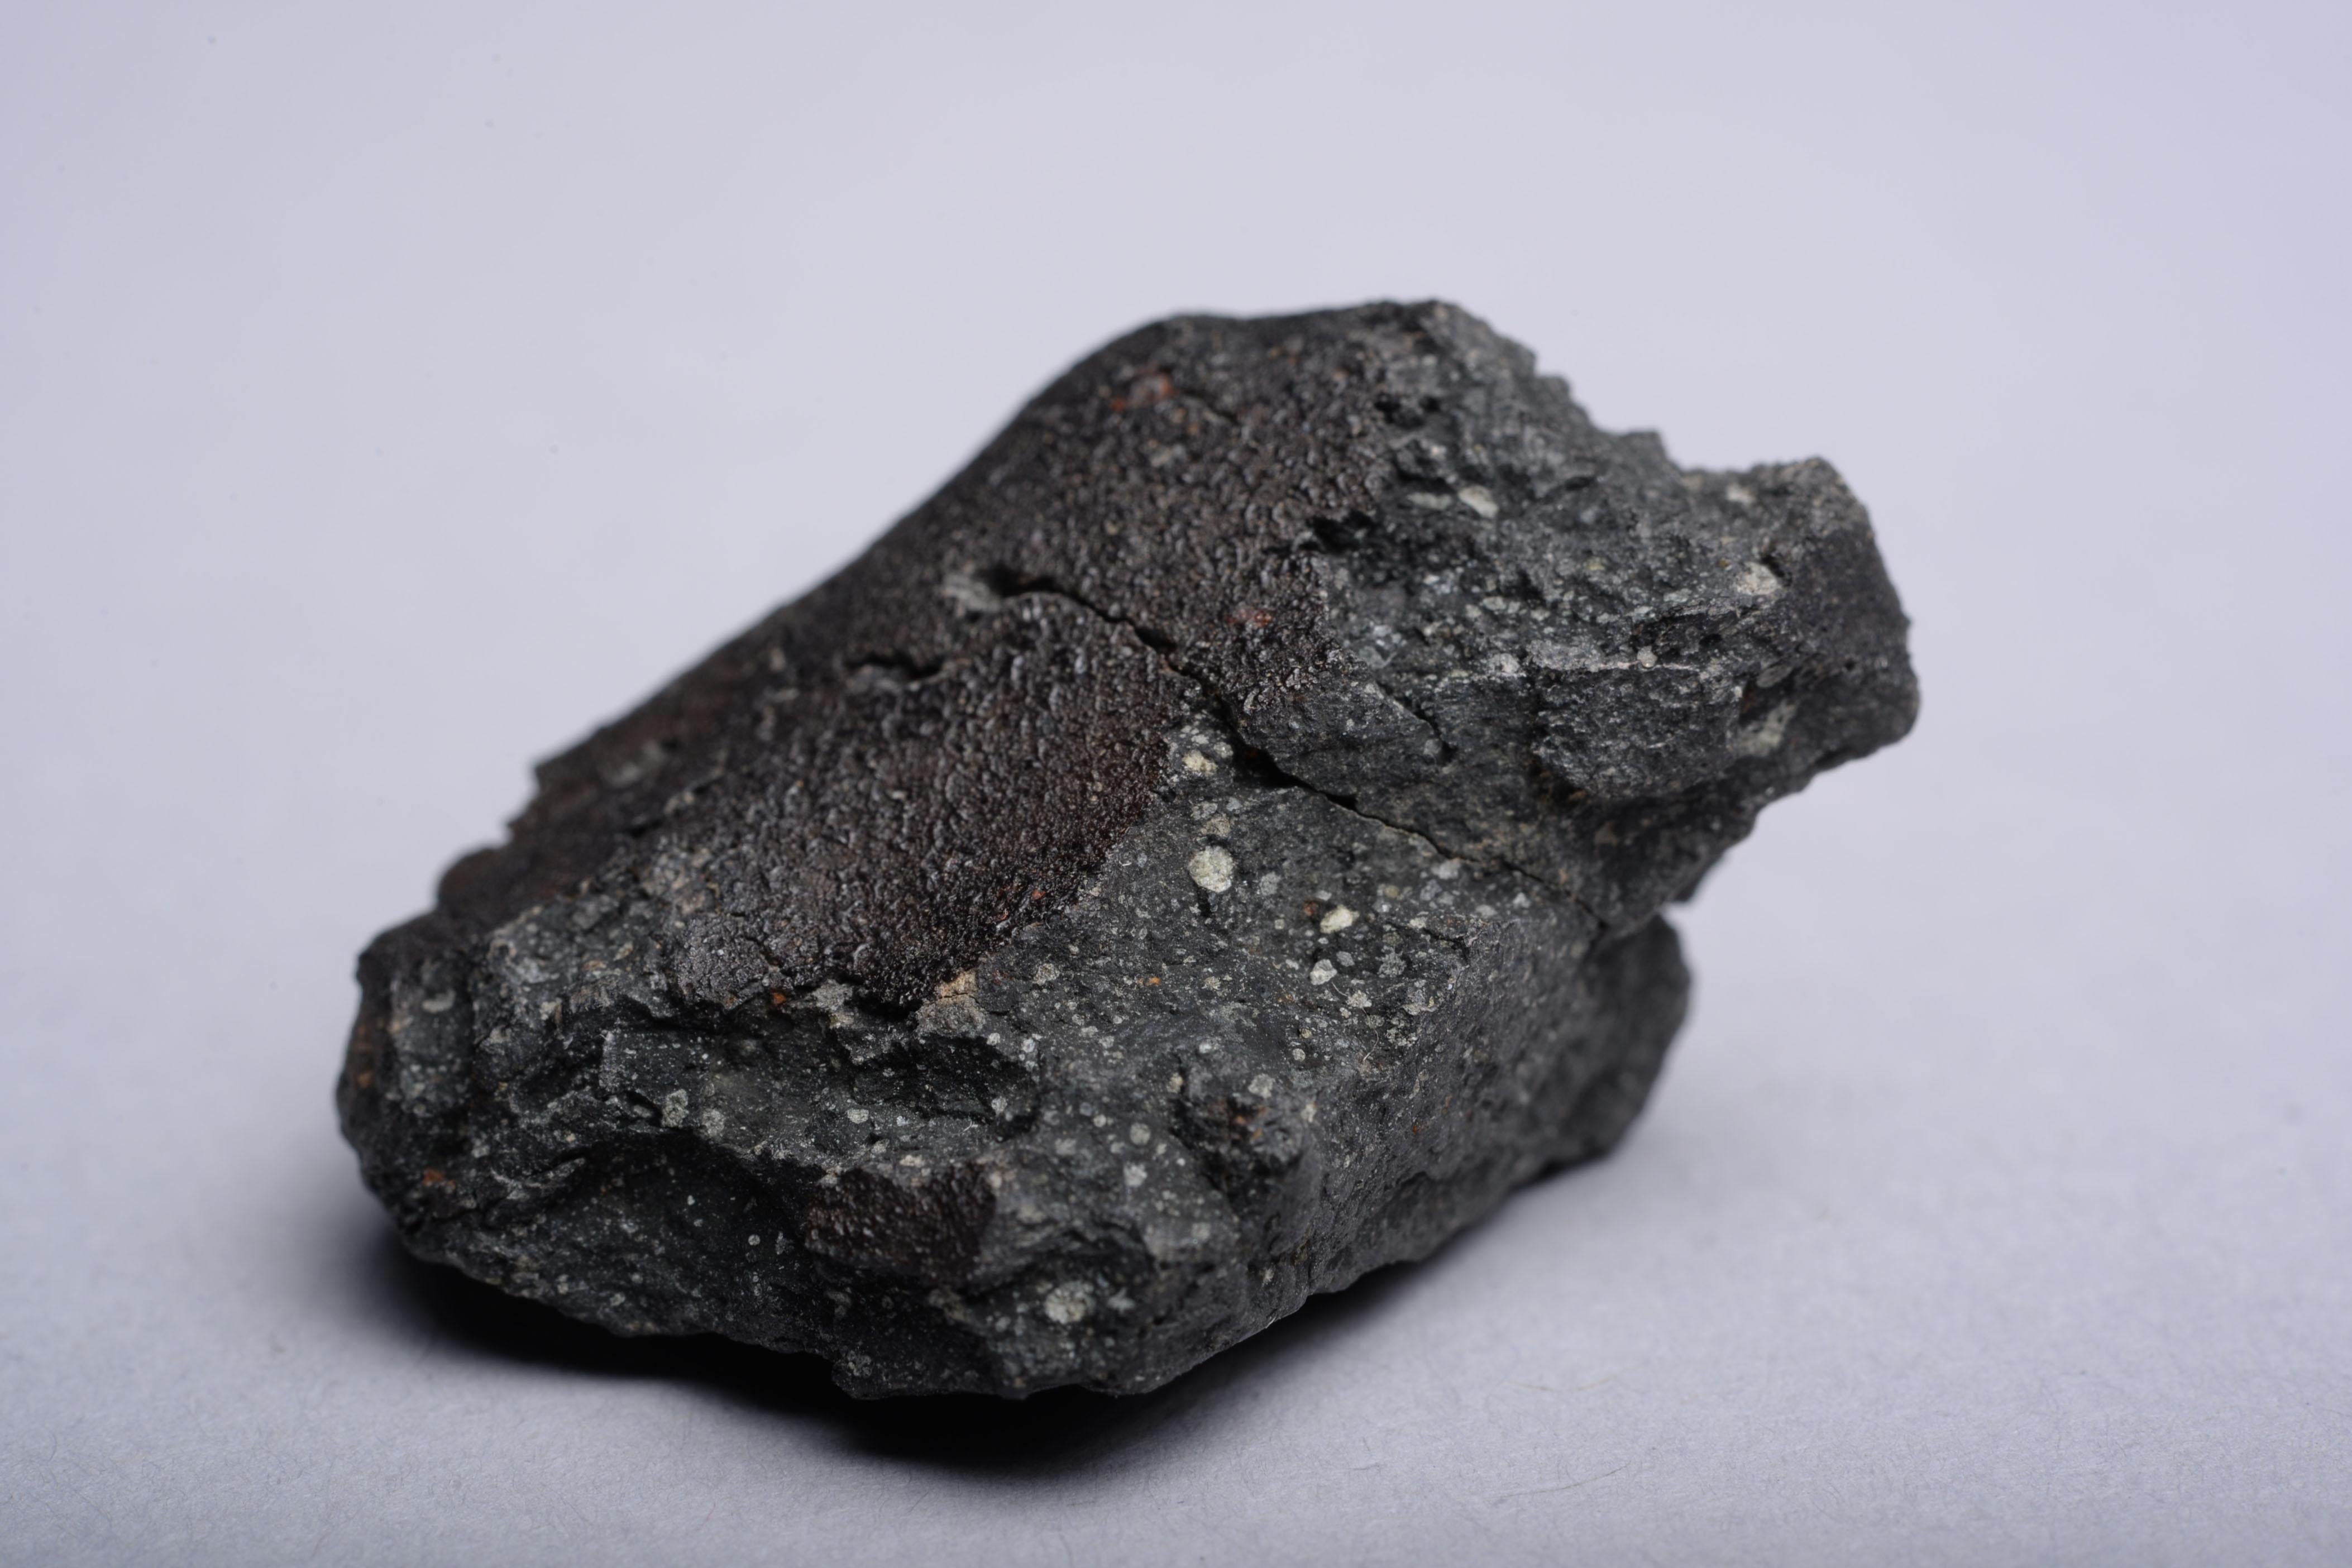 18th Century and Earlier Fragment of the Famous Murchison Meteorite